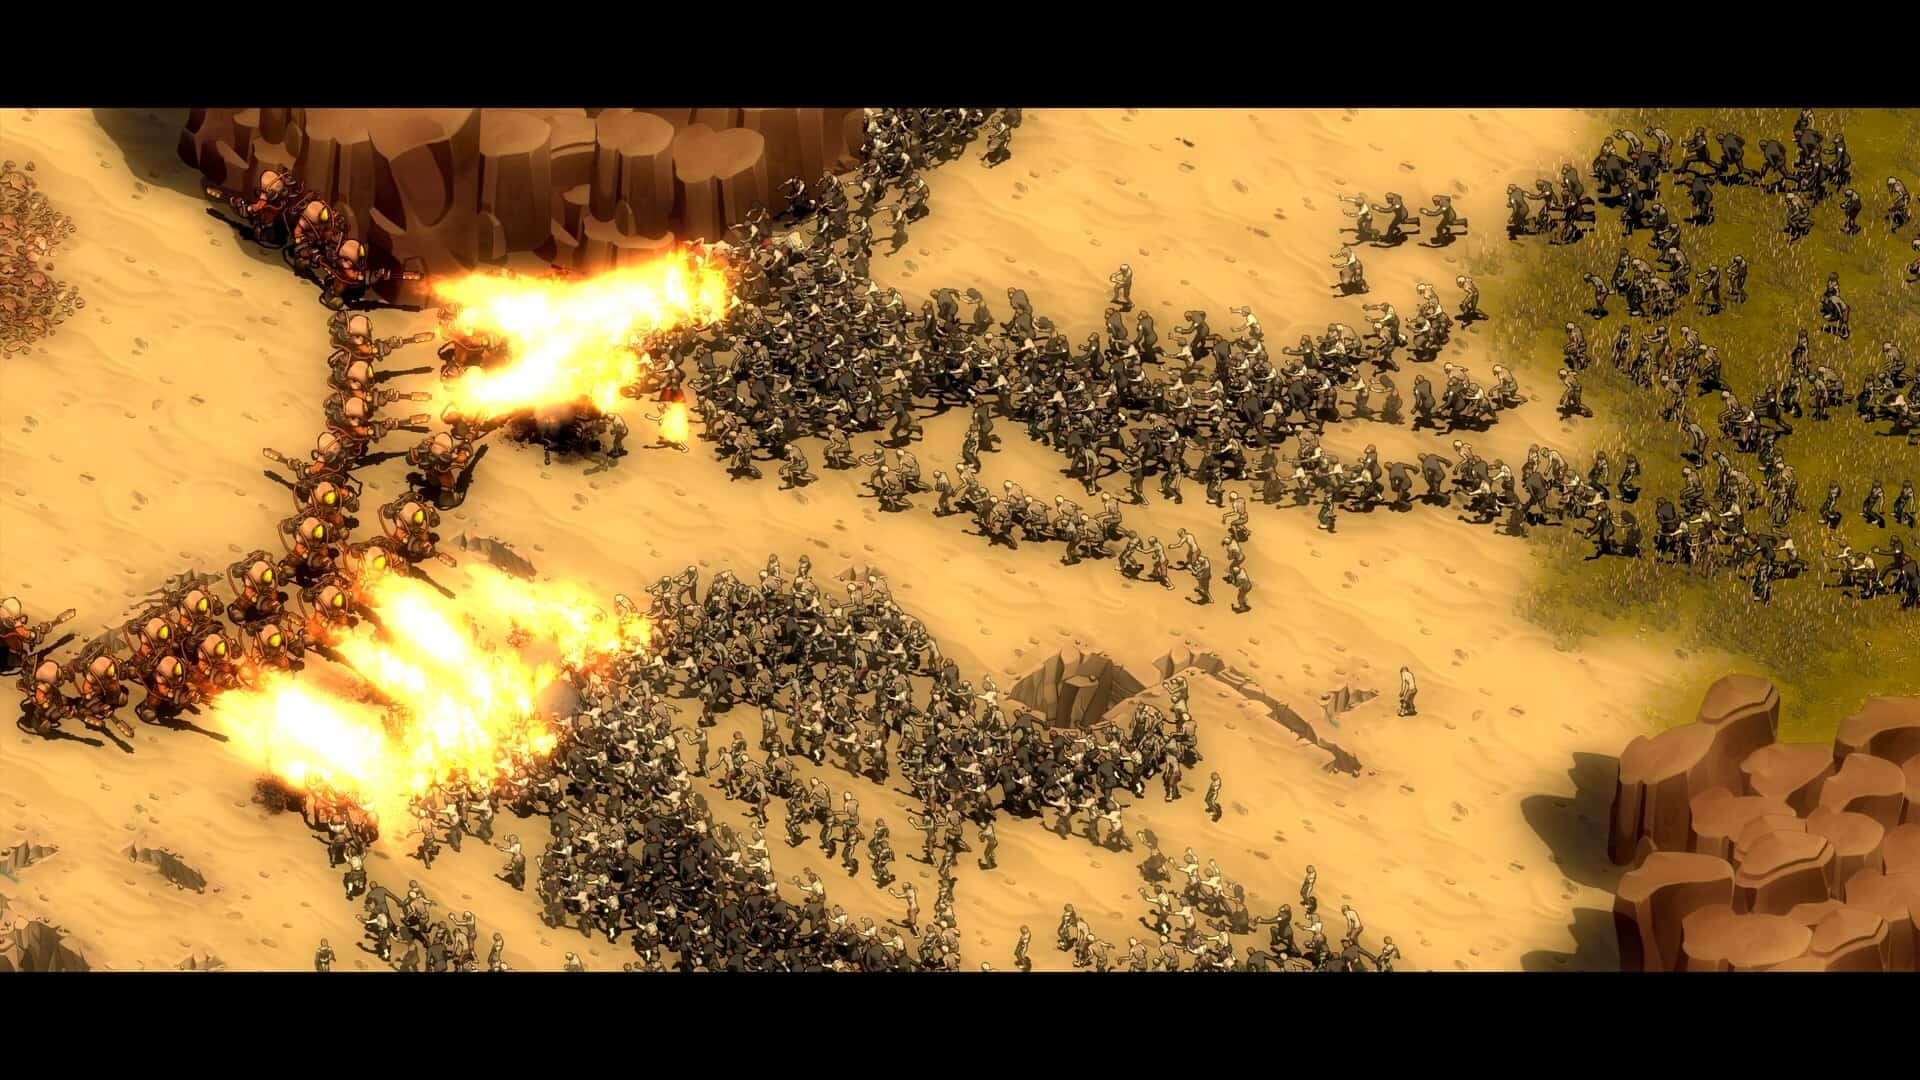 They Are Billions game screenshot courtesy Steam